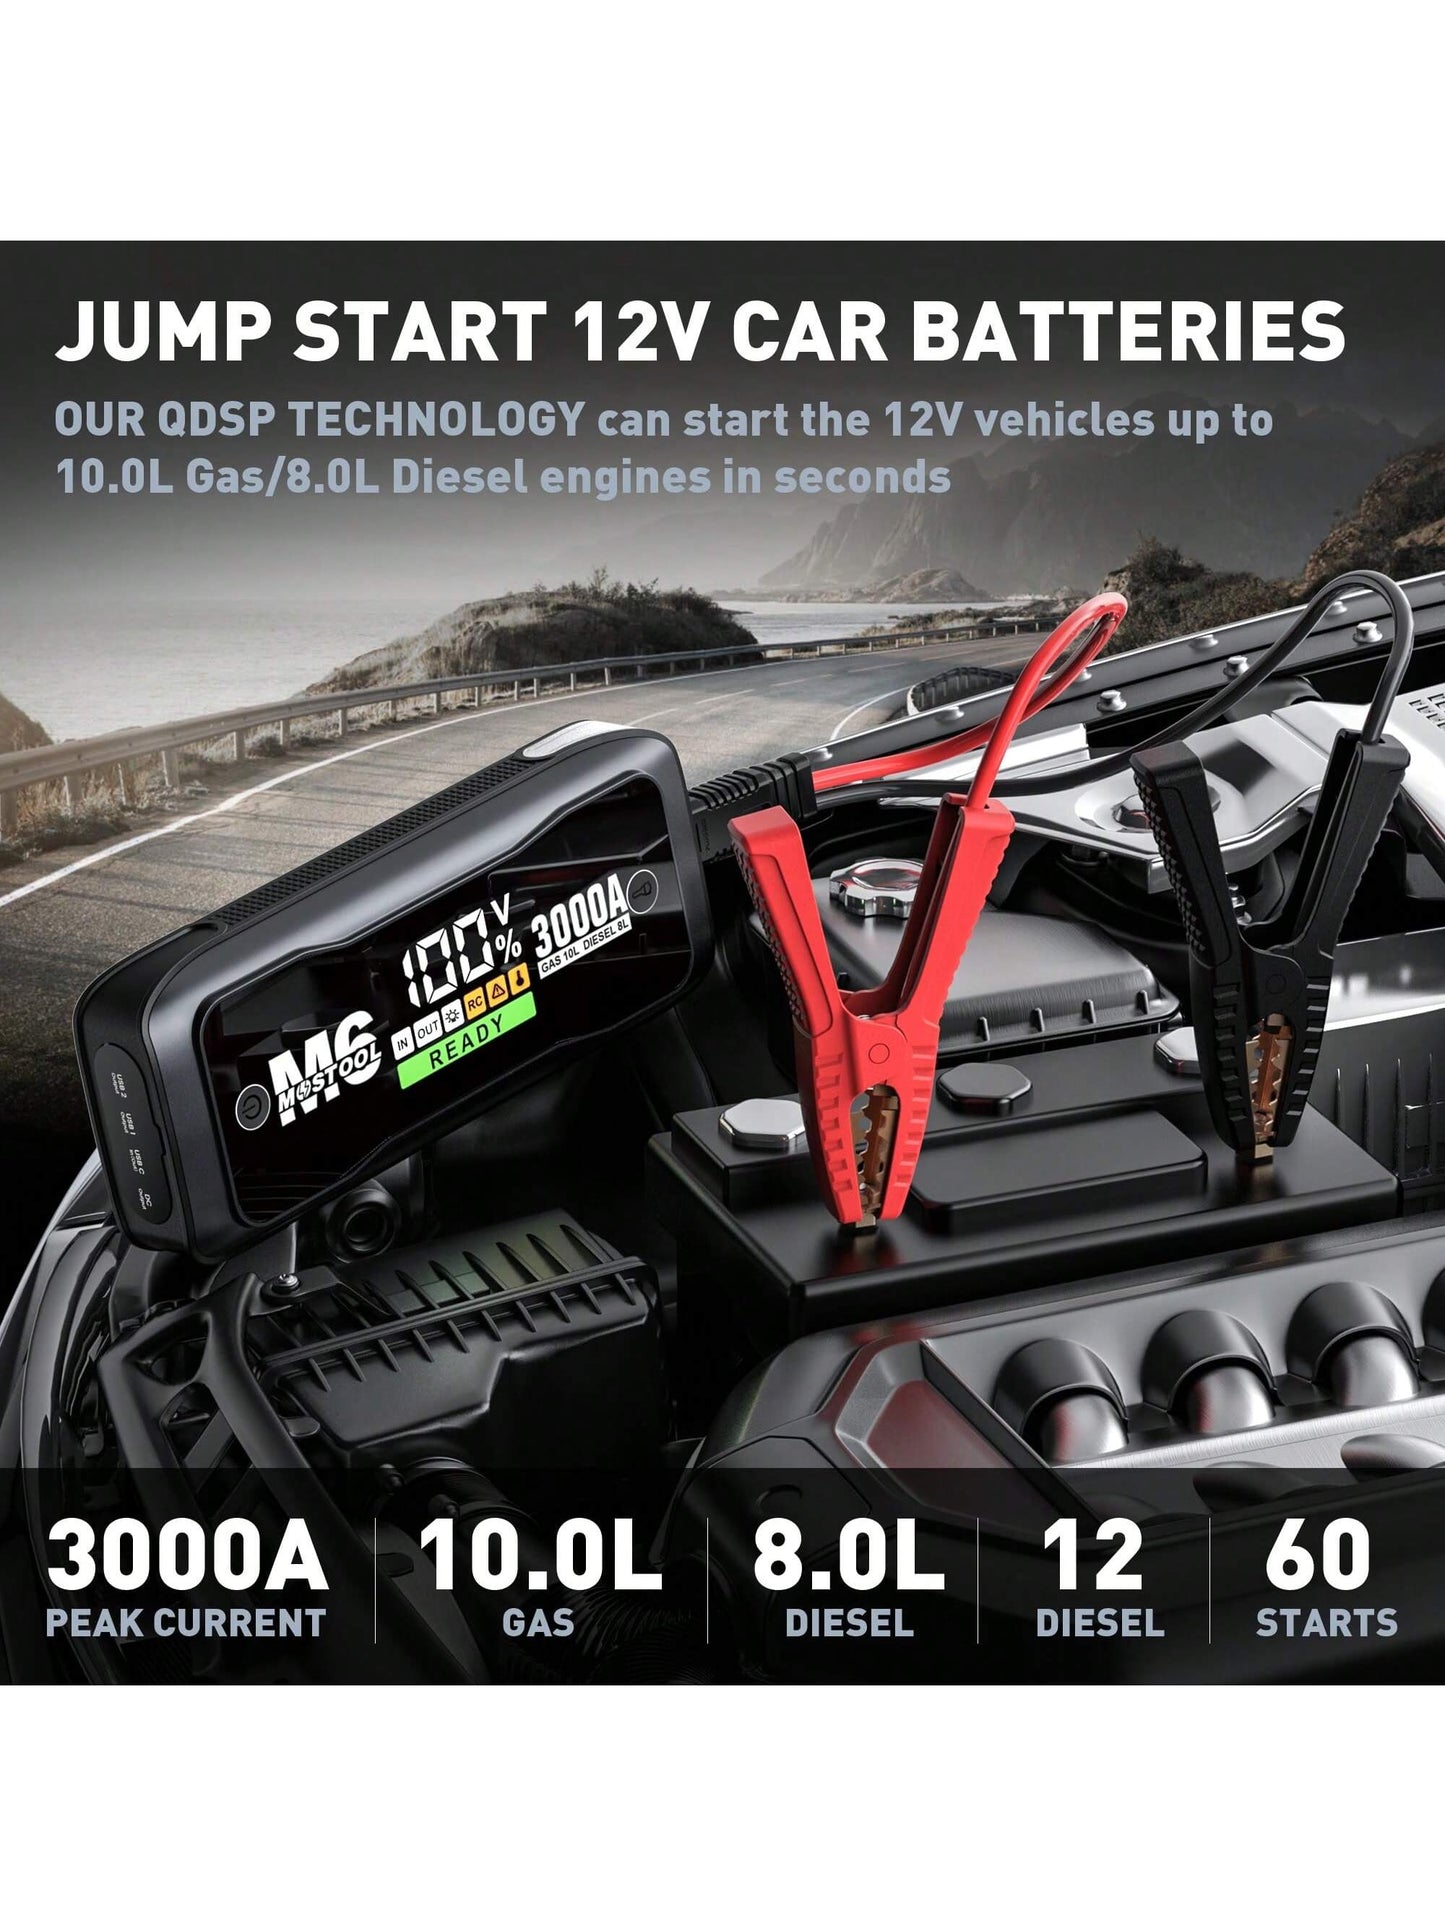 Jump Starter Battery Pack - 3000A Peak, 20000mAh Capacity - Portable Jumper Box, 12V Car Battery Charger & Jumper Cables,10.0L Gas & 8.0L Diesel Engines